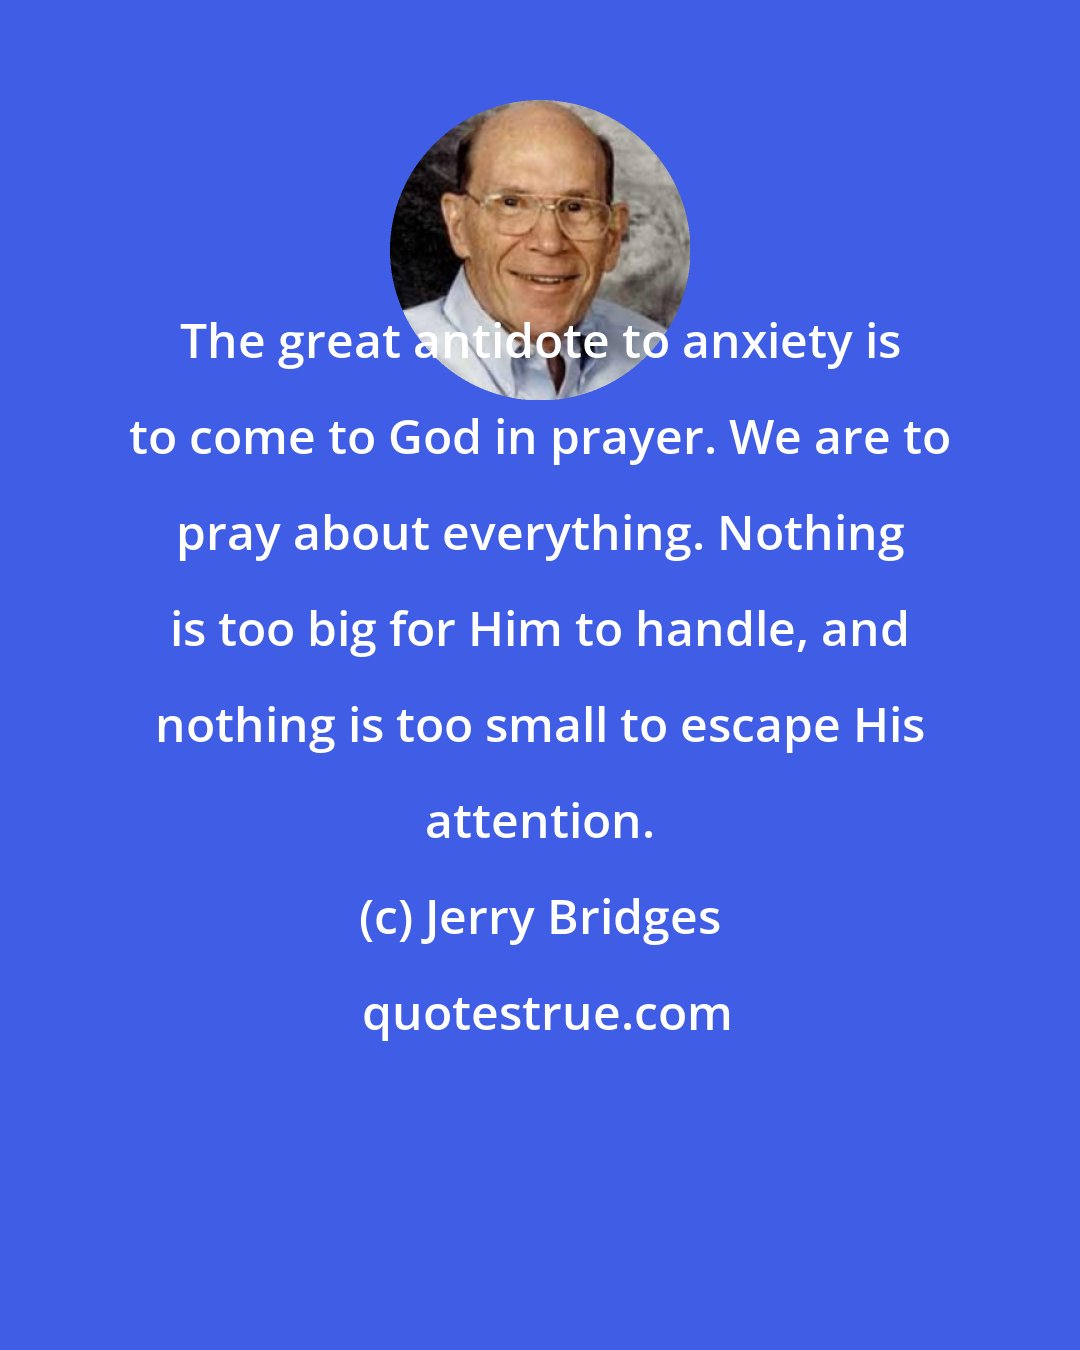 Jerry Bridges: The great antidote to anxiety is to come to God in prayer. We are to pray about everything. Nothing is too big for Him to handle, and nothing is too small to escape His attention.